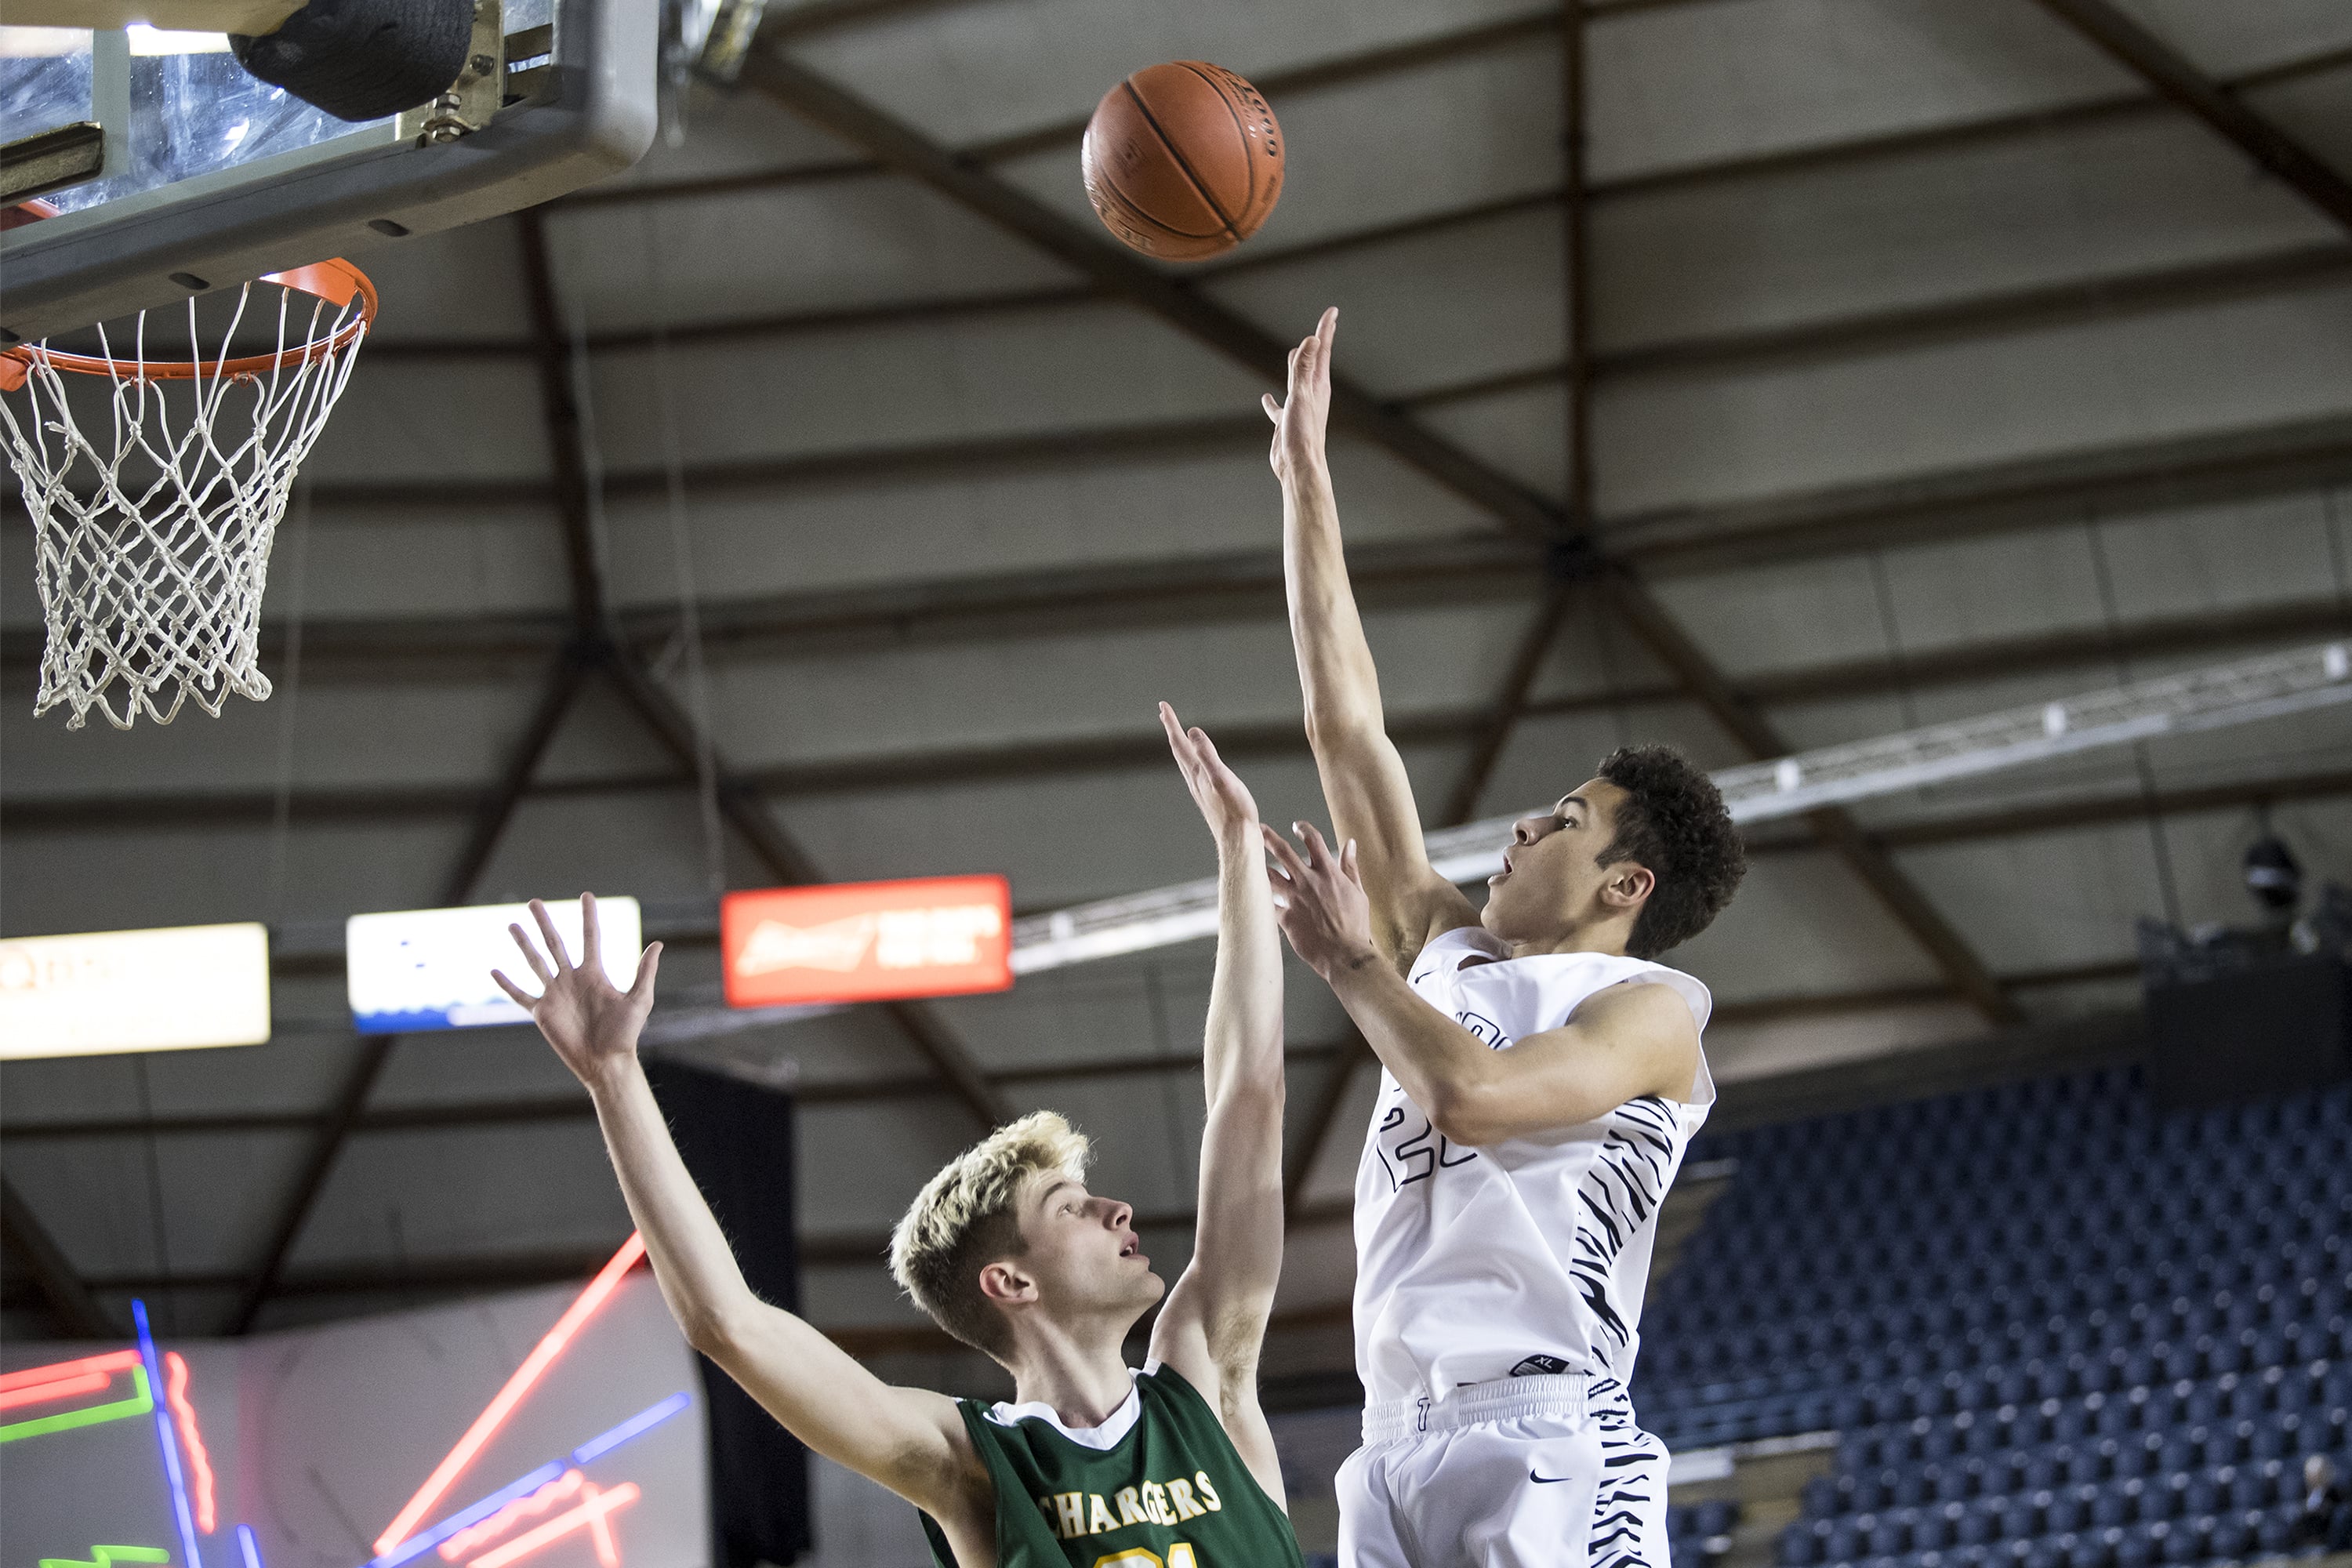 Battle Ground's Kaden Perry shoots past a Kentridge defender during the 4A Hardwood Classic at the Tacoma Dome on Wednesday, Feb. 27, 2019.